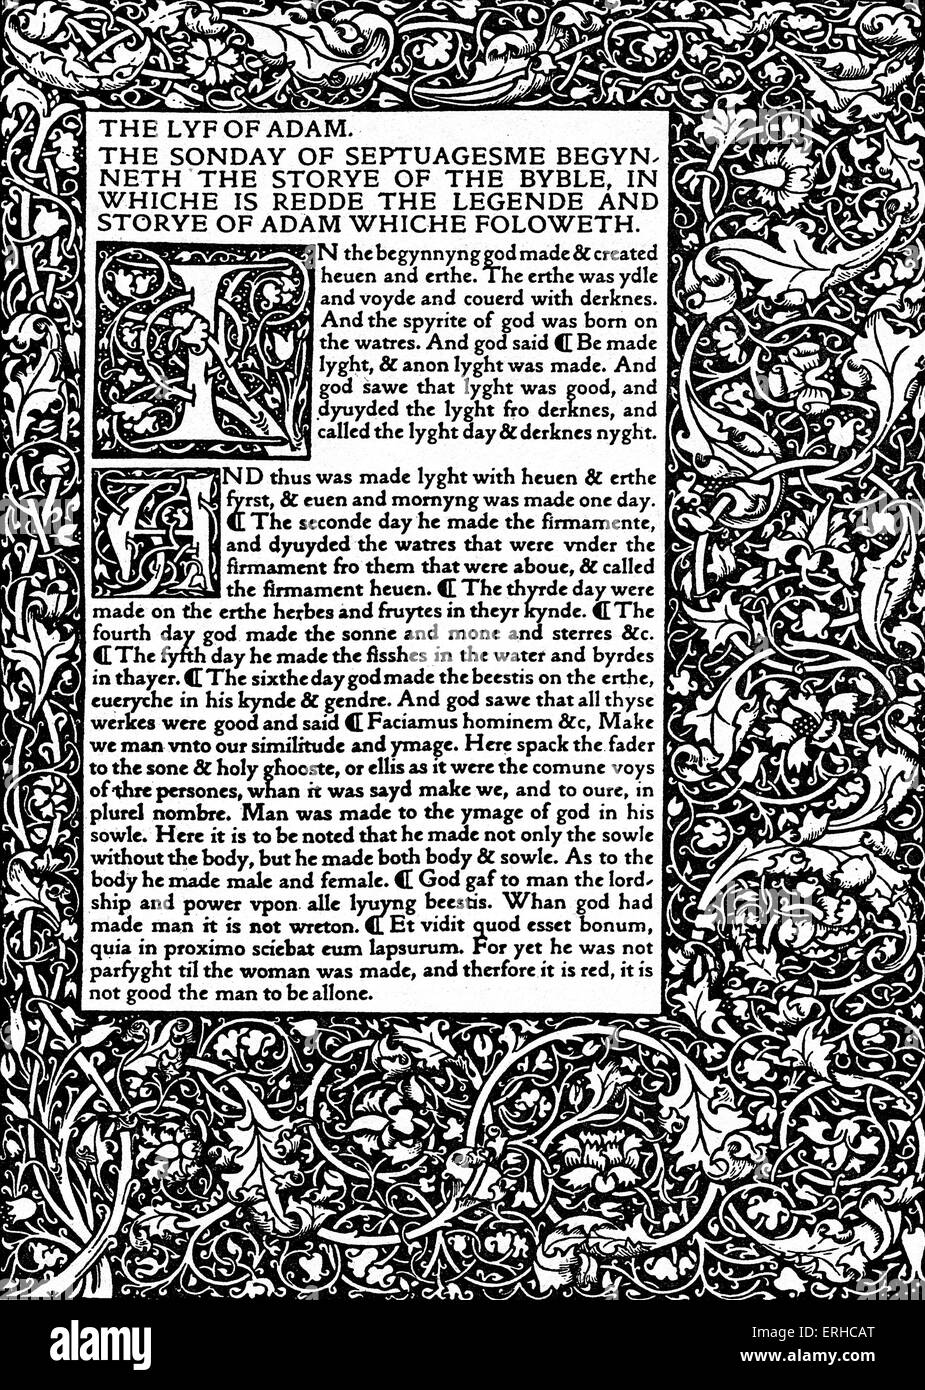 Page from the 'The Golden Legend' by William Caxton. Designed by William Morris and printed by his private press company, the Stock Photo